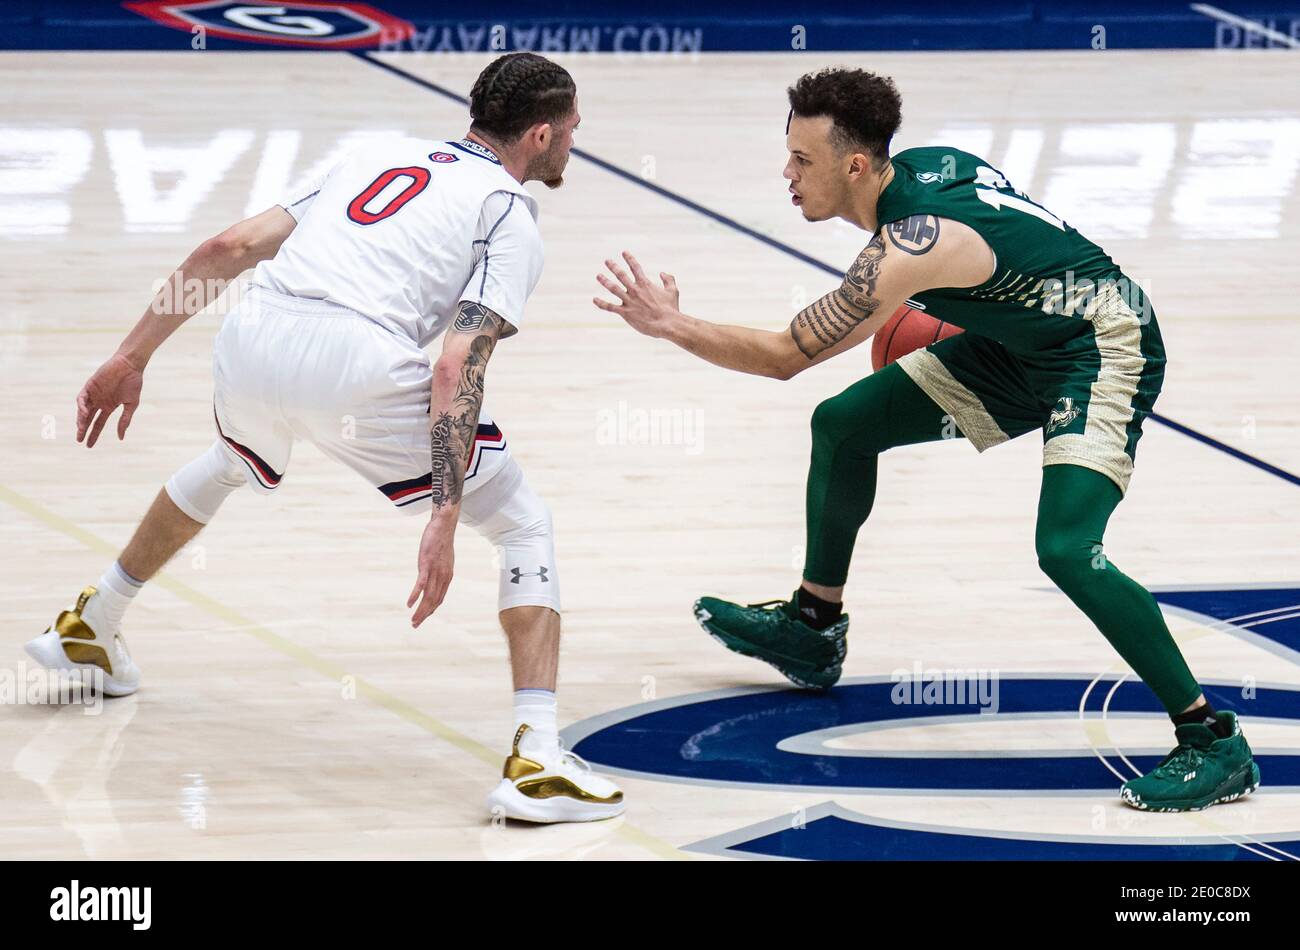 Moraga, CA U.S. 30th Dec, 2020. A. Sacramento State Hornets guard Deshaun Highler (12) sets the play during the NCAA Men's Basketball game between Sacramento State Hornets and the Saint Mary's Gaels 45-63 lost at McKeon Pavilion Moraga Calif. Thurman James/CSM/Alamy Live News Stock Photo